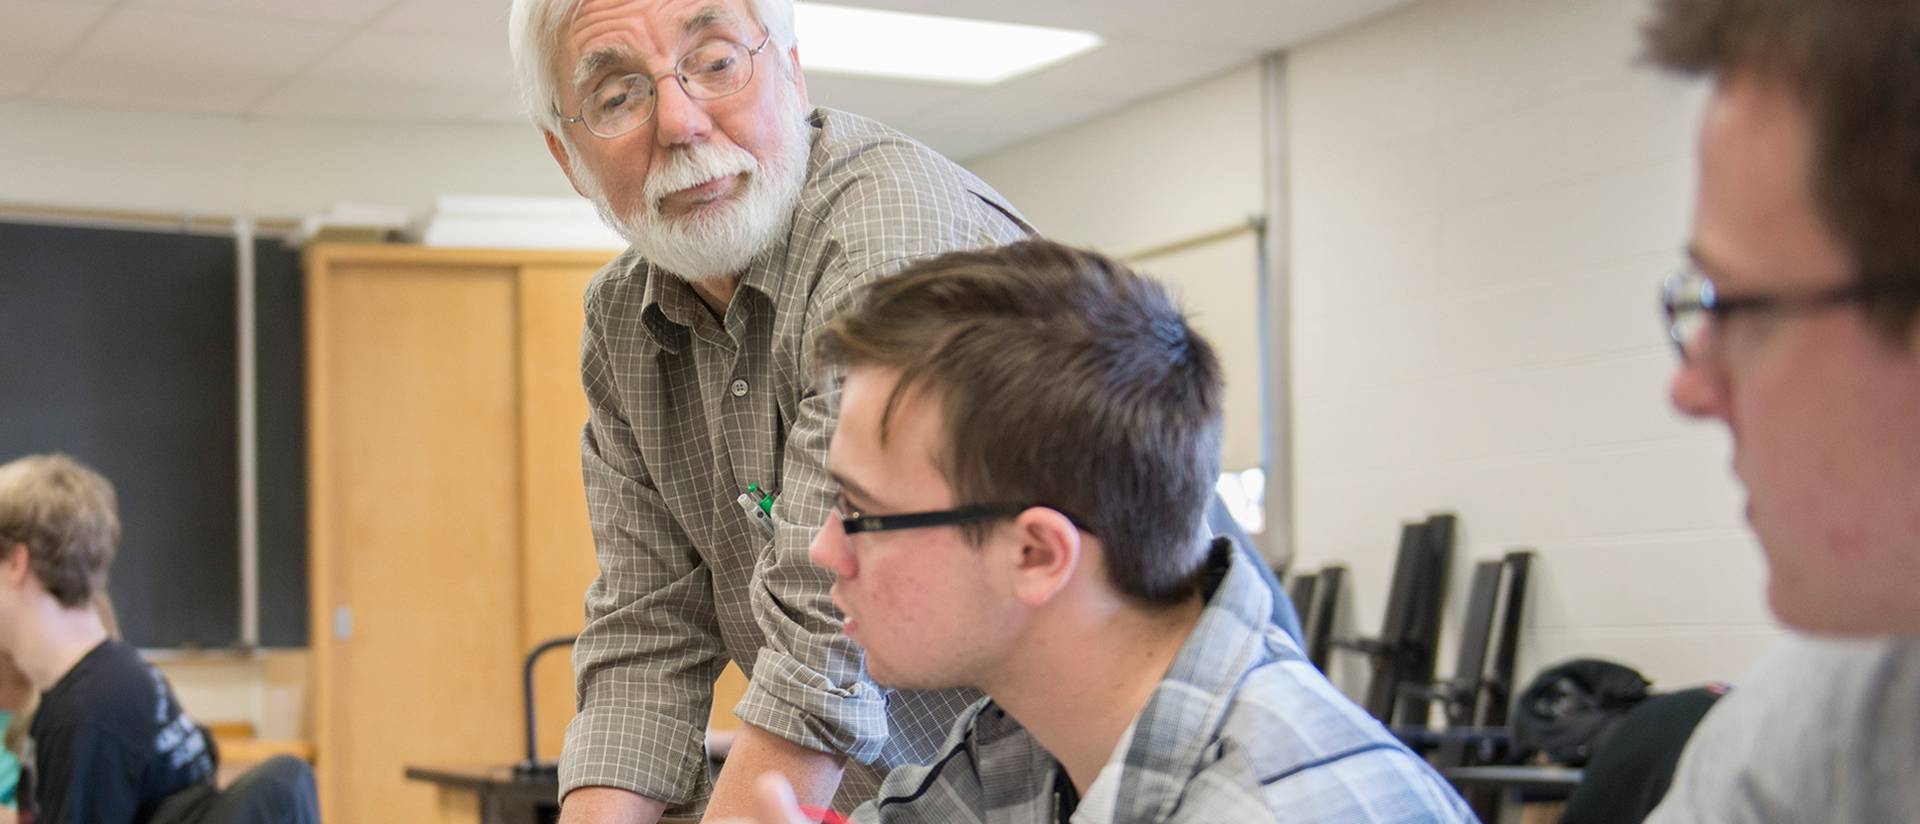 Dr. Thomas Lockhart, UW-Eau Claire professor of physics and astronomy, works in a physics lab with students Tyler Tolan, Eau Claire, and Mathew Guenther, Black River Falls, as they test for the potentials of electric fields using a digital multimeter.